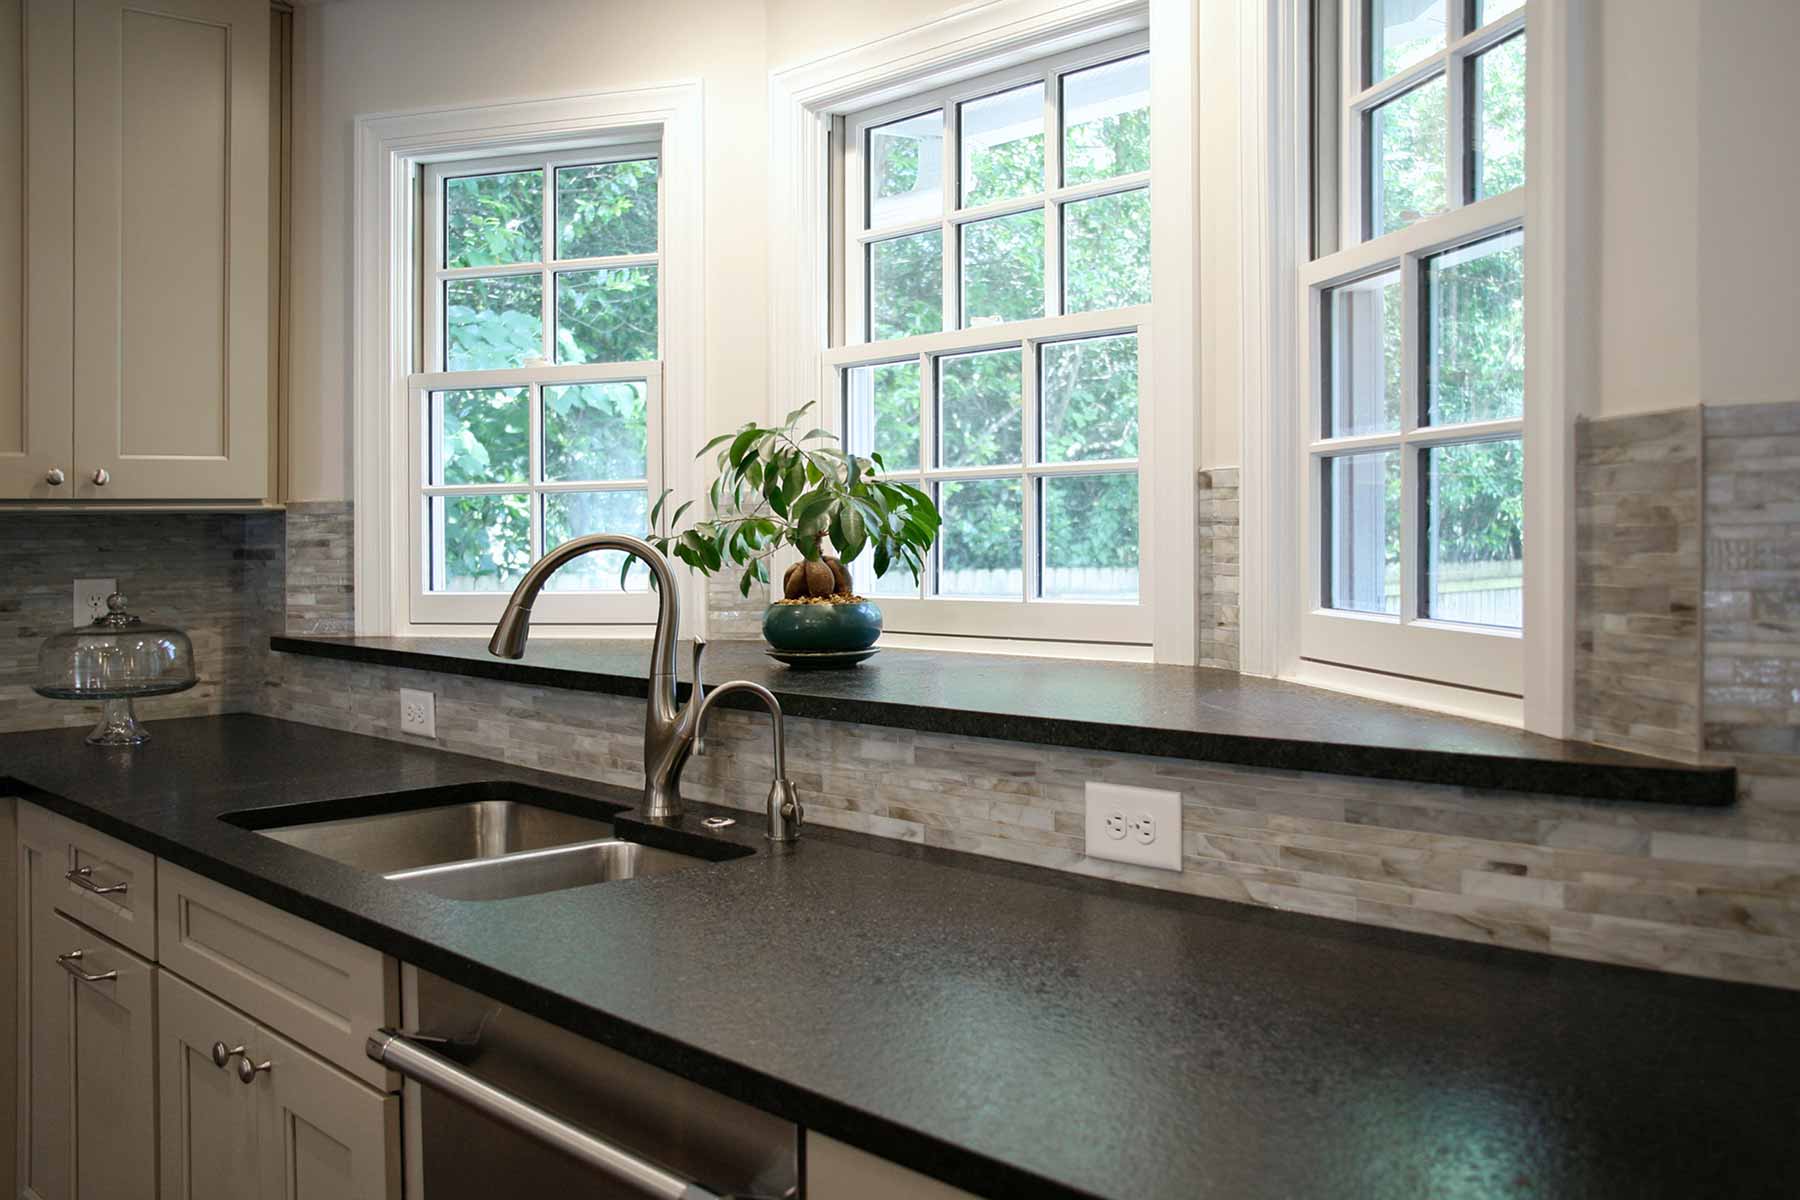 Sink and bow window after remodeling